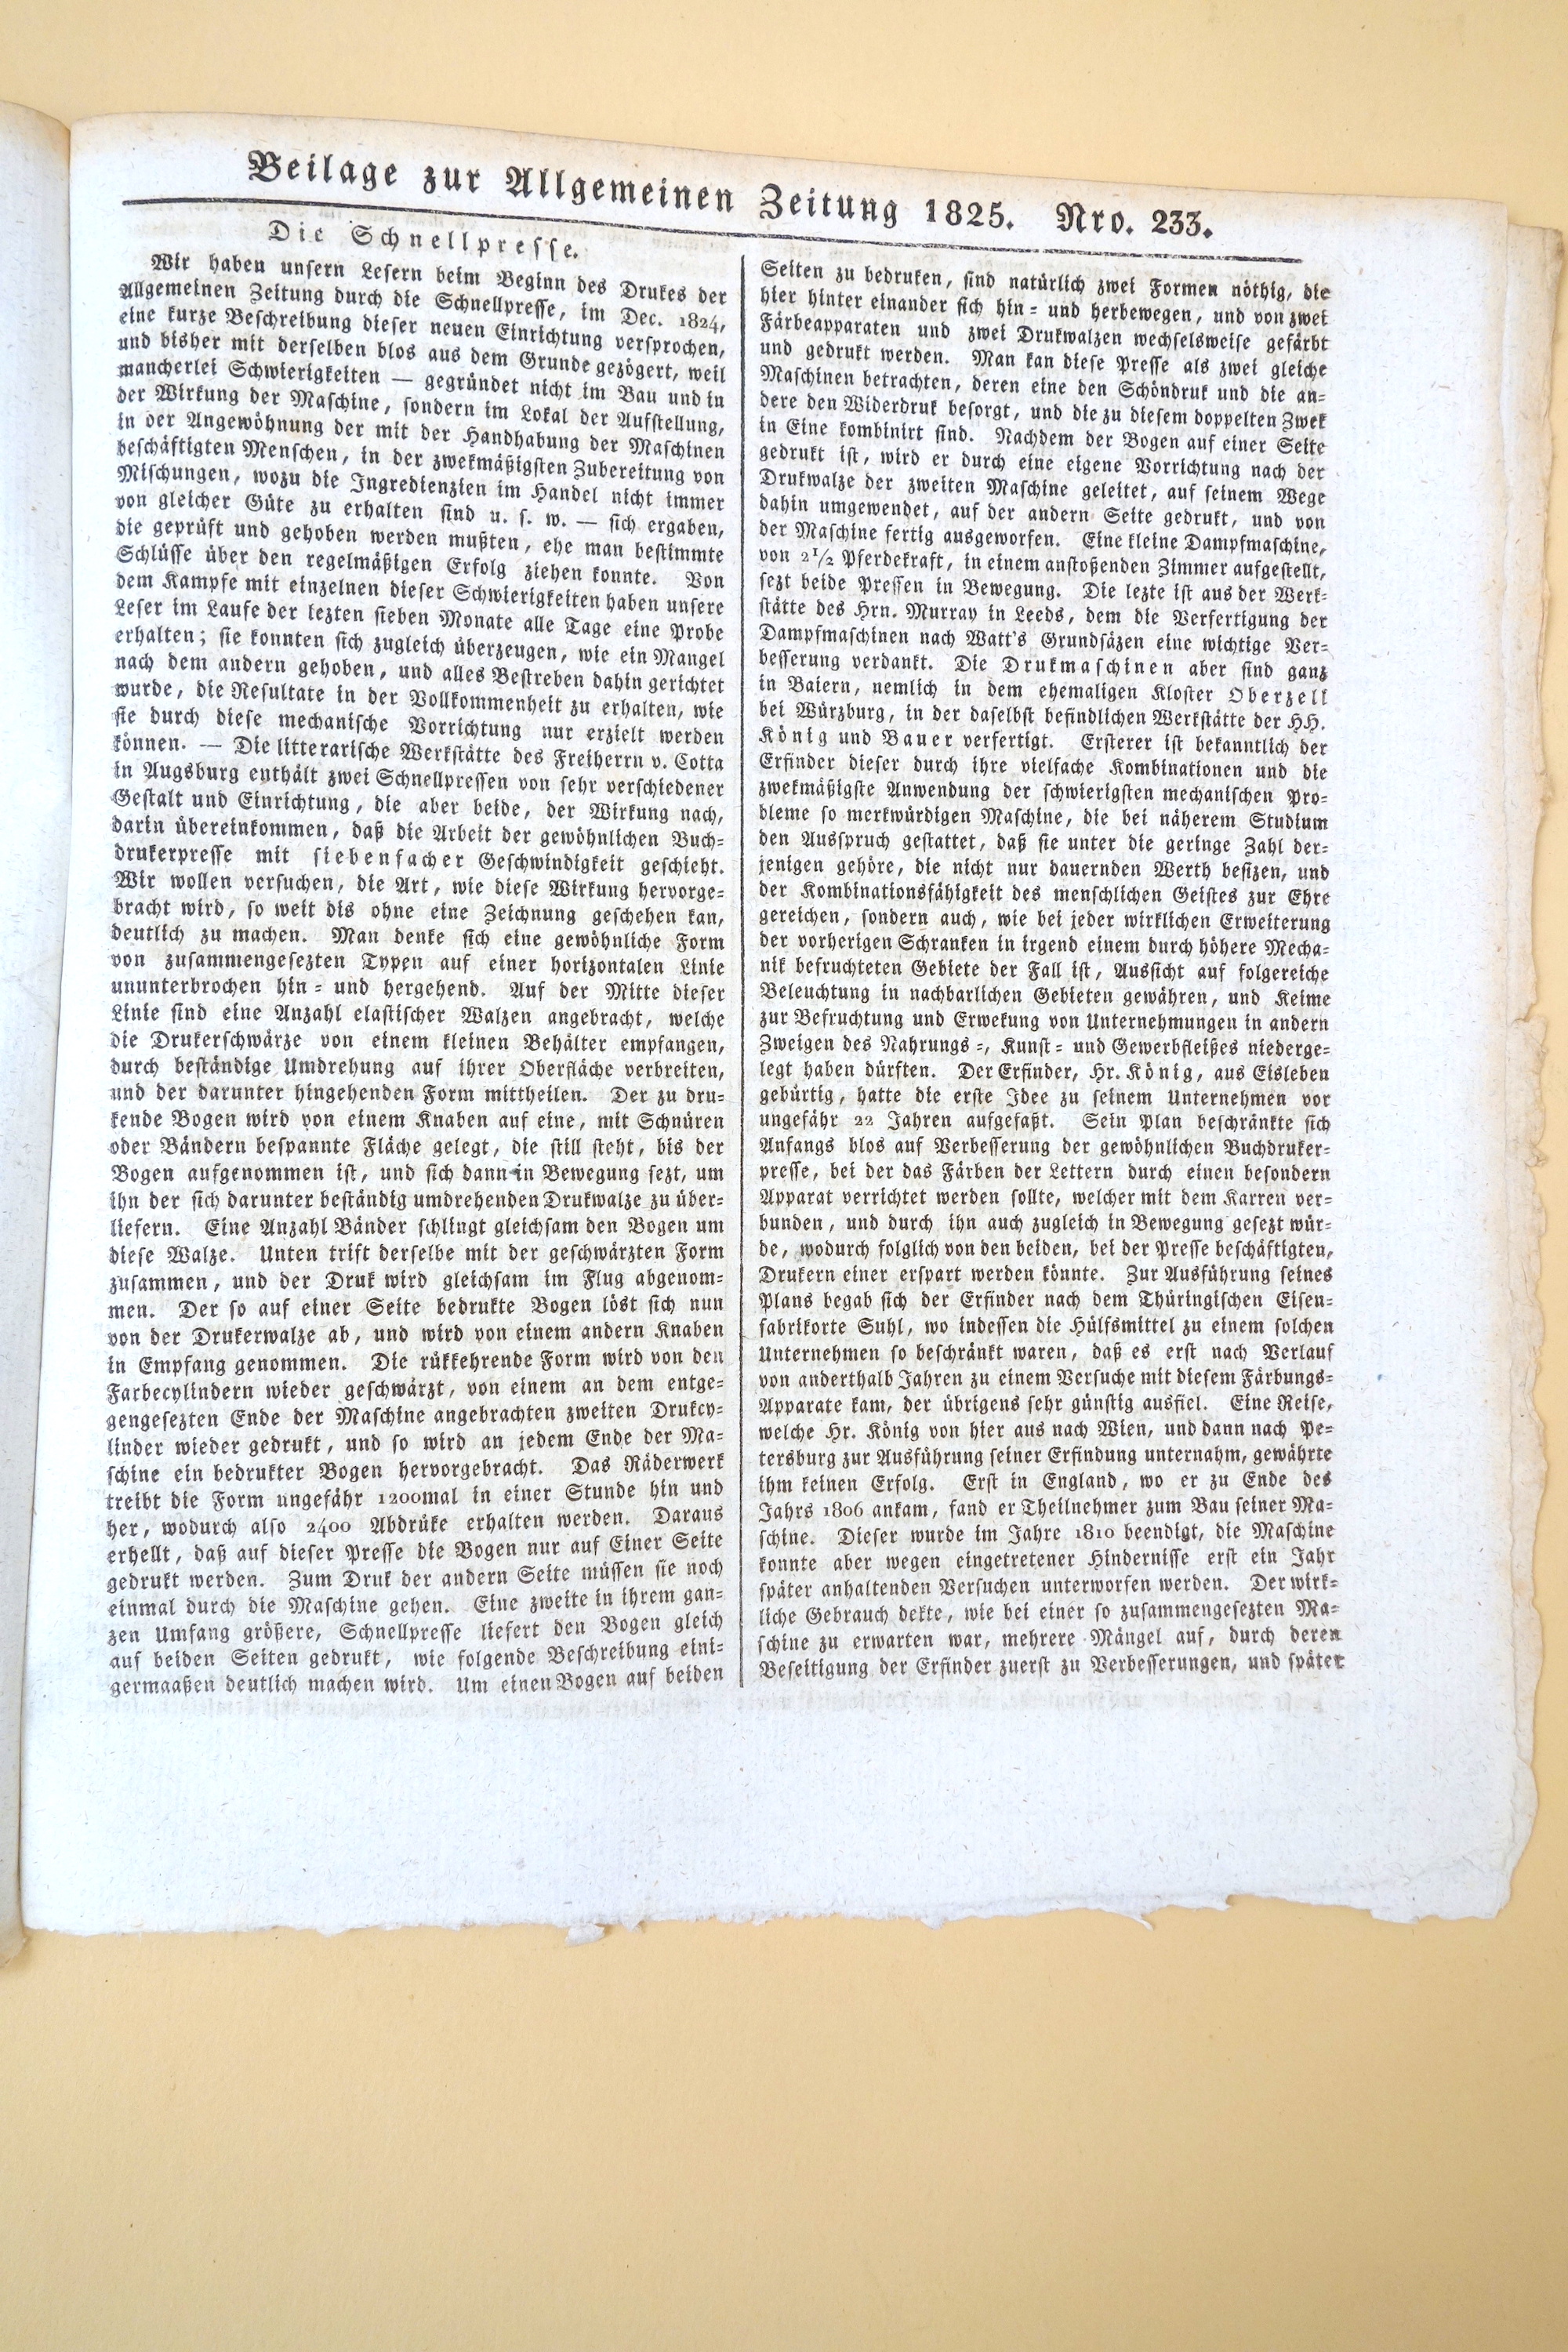 This was probably the first detailed article on mechanized printing published in Germany.